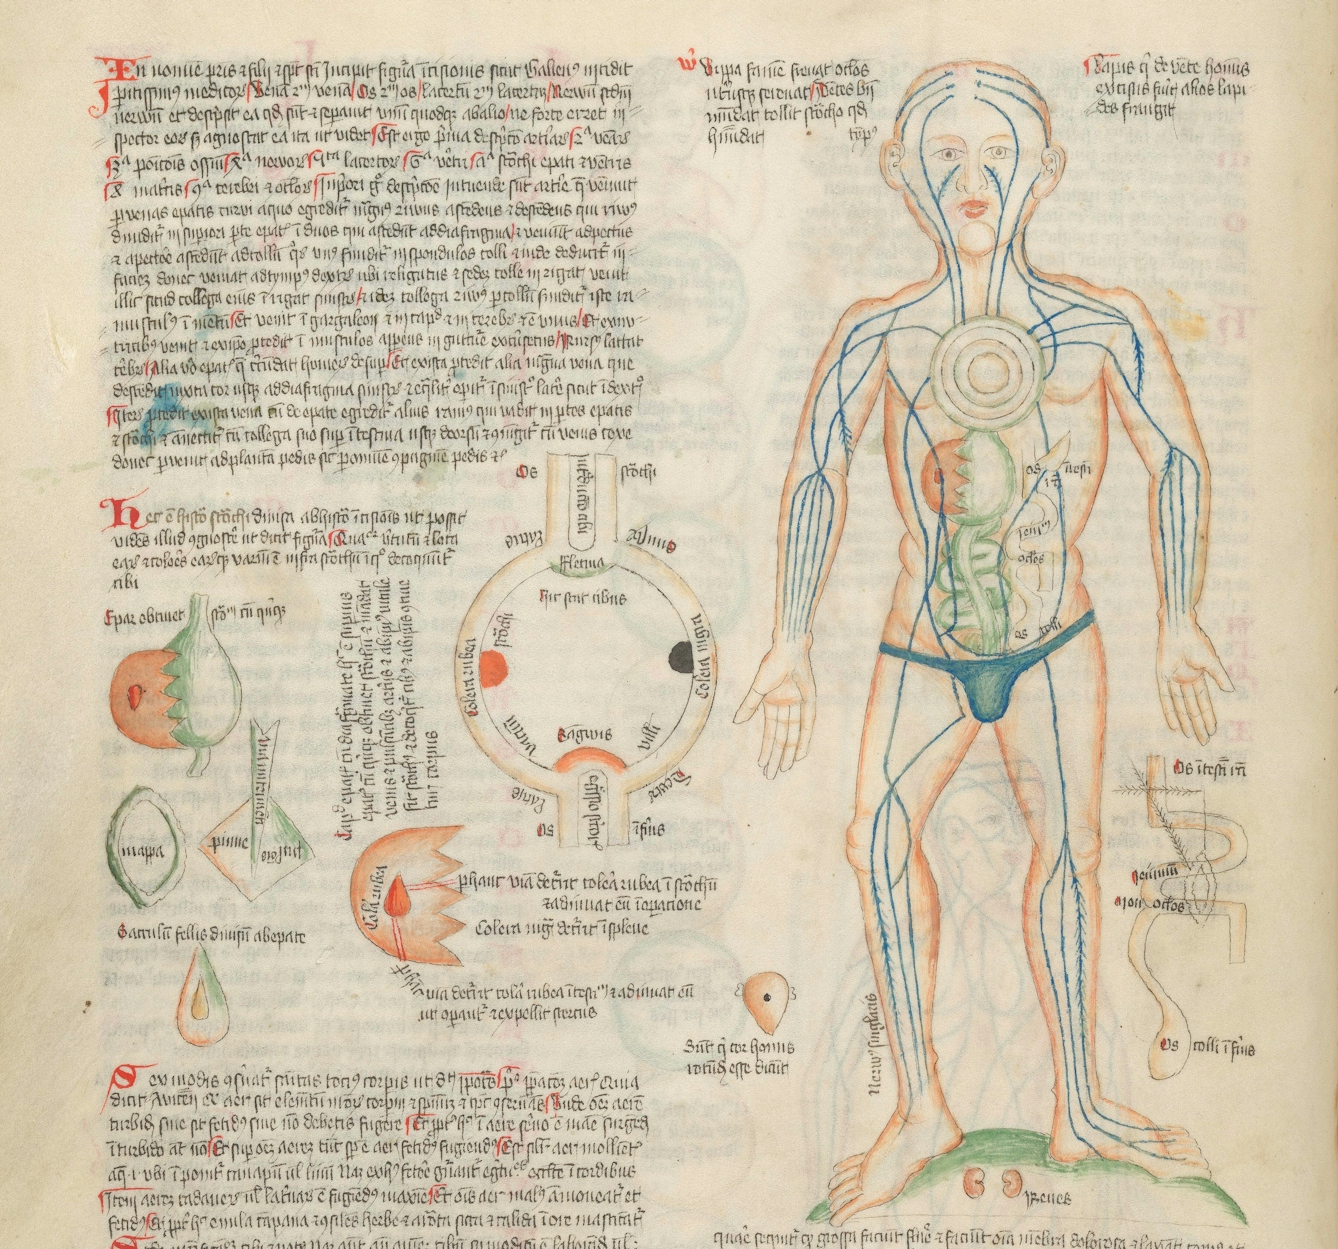 Medieval colour illustration of the veins in the human body, also showing the humours in a circular diagram to the right. The page also features lots of text in latin with some red lettering.